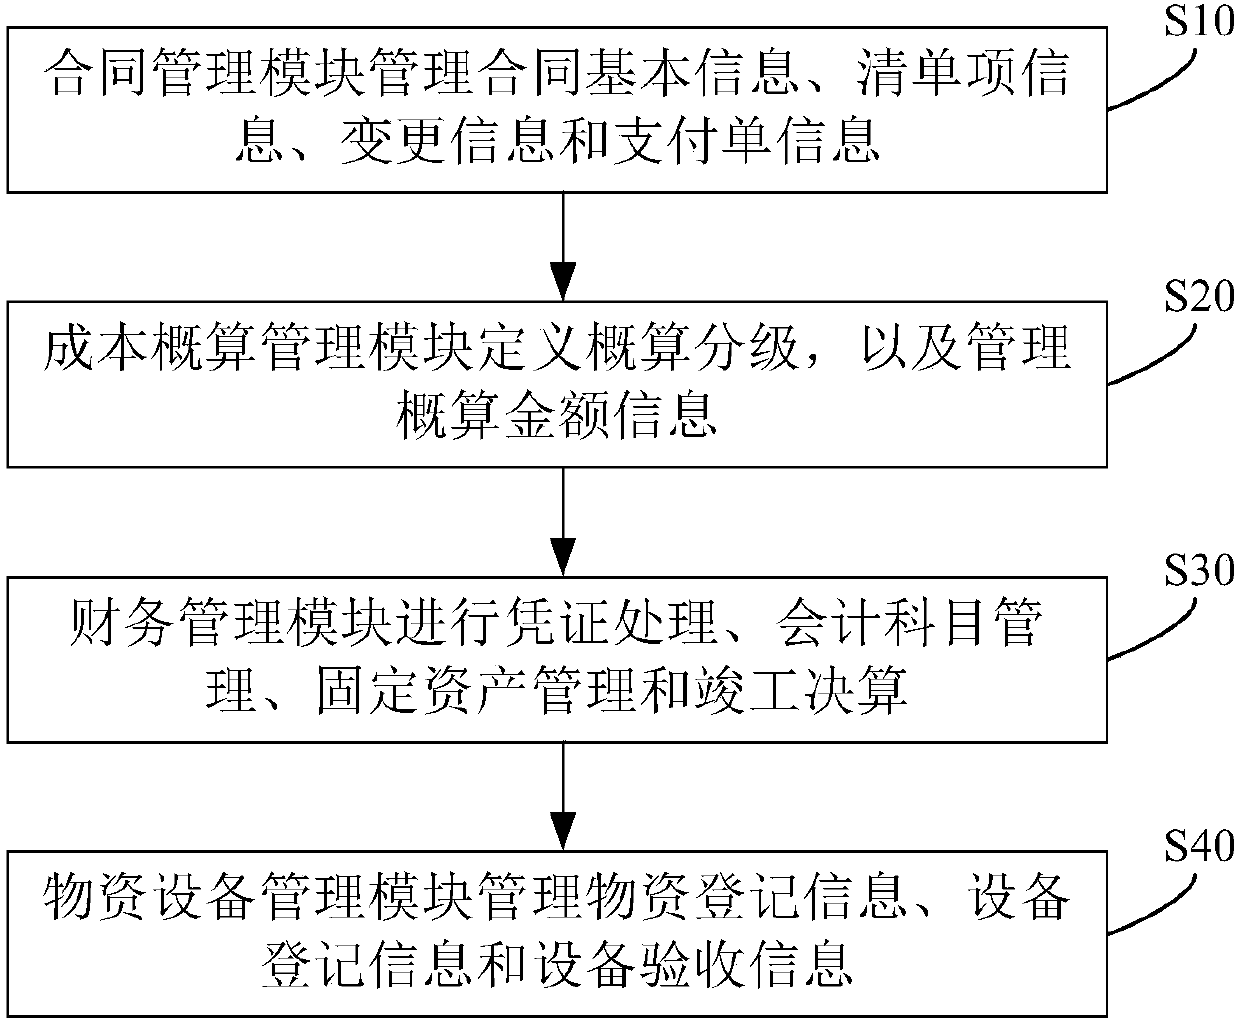 Engineering project information management system and method